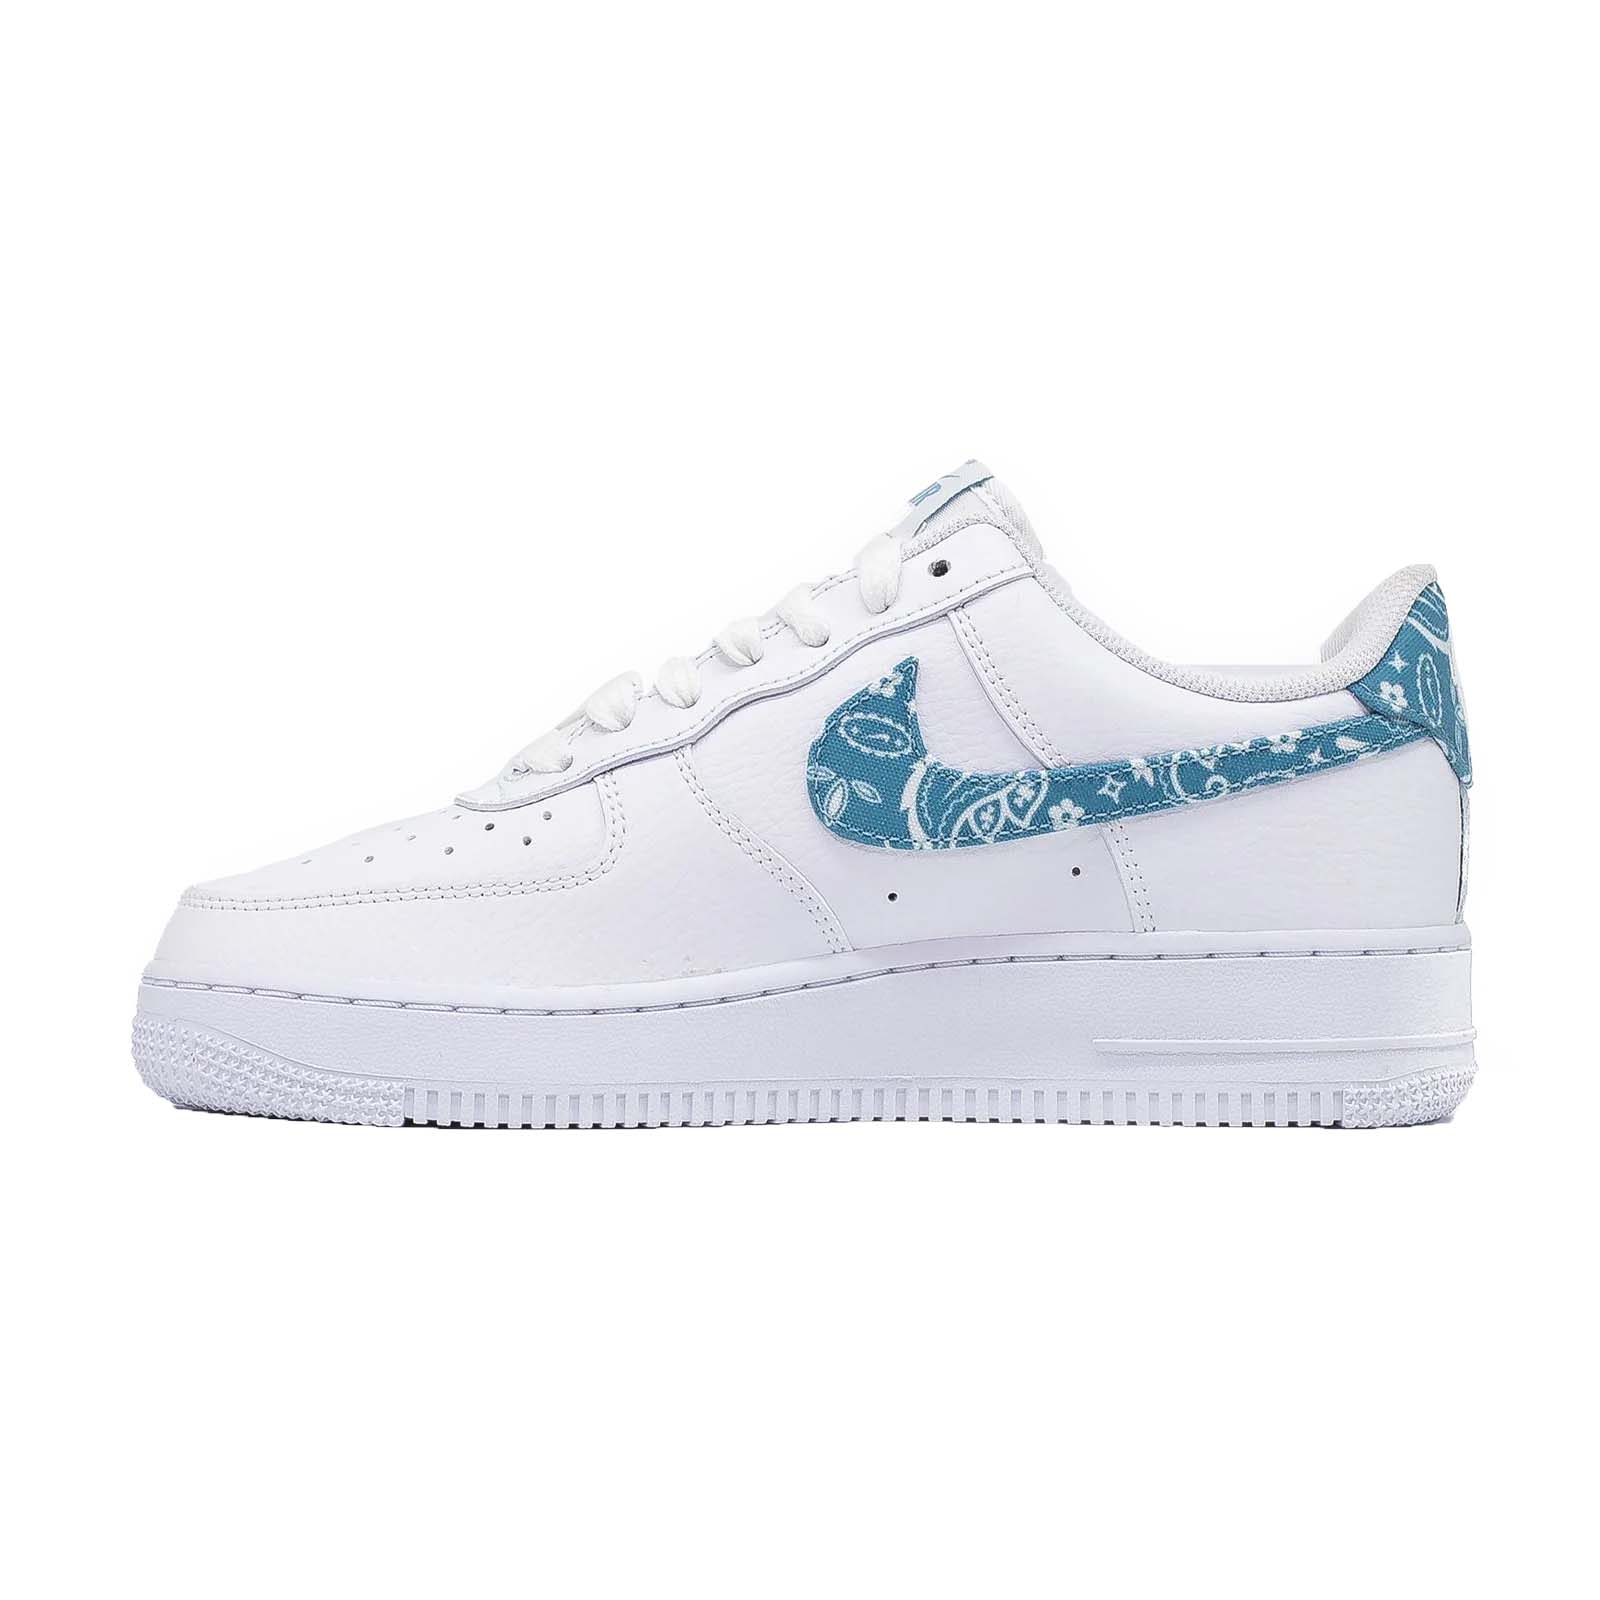 Women's Nike Air Force 1 Low, '07 Essentials Blue Paisley